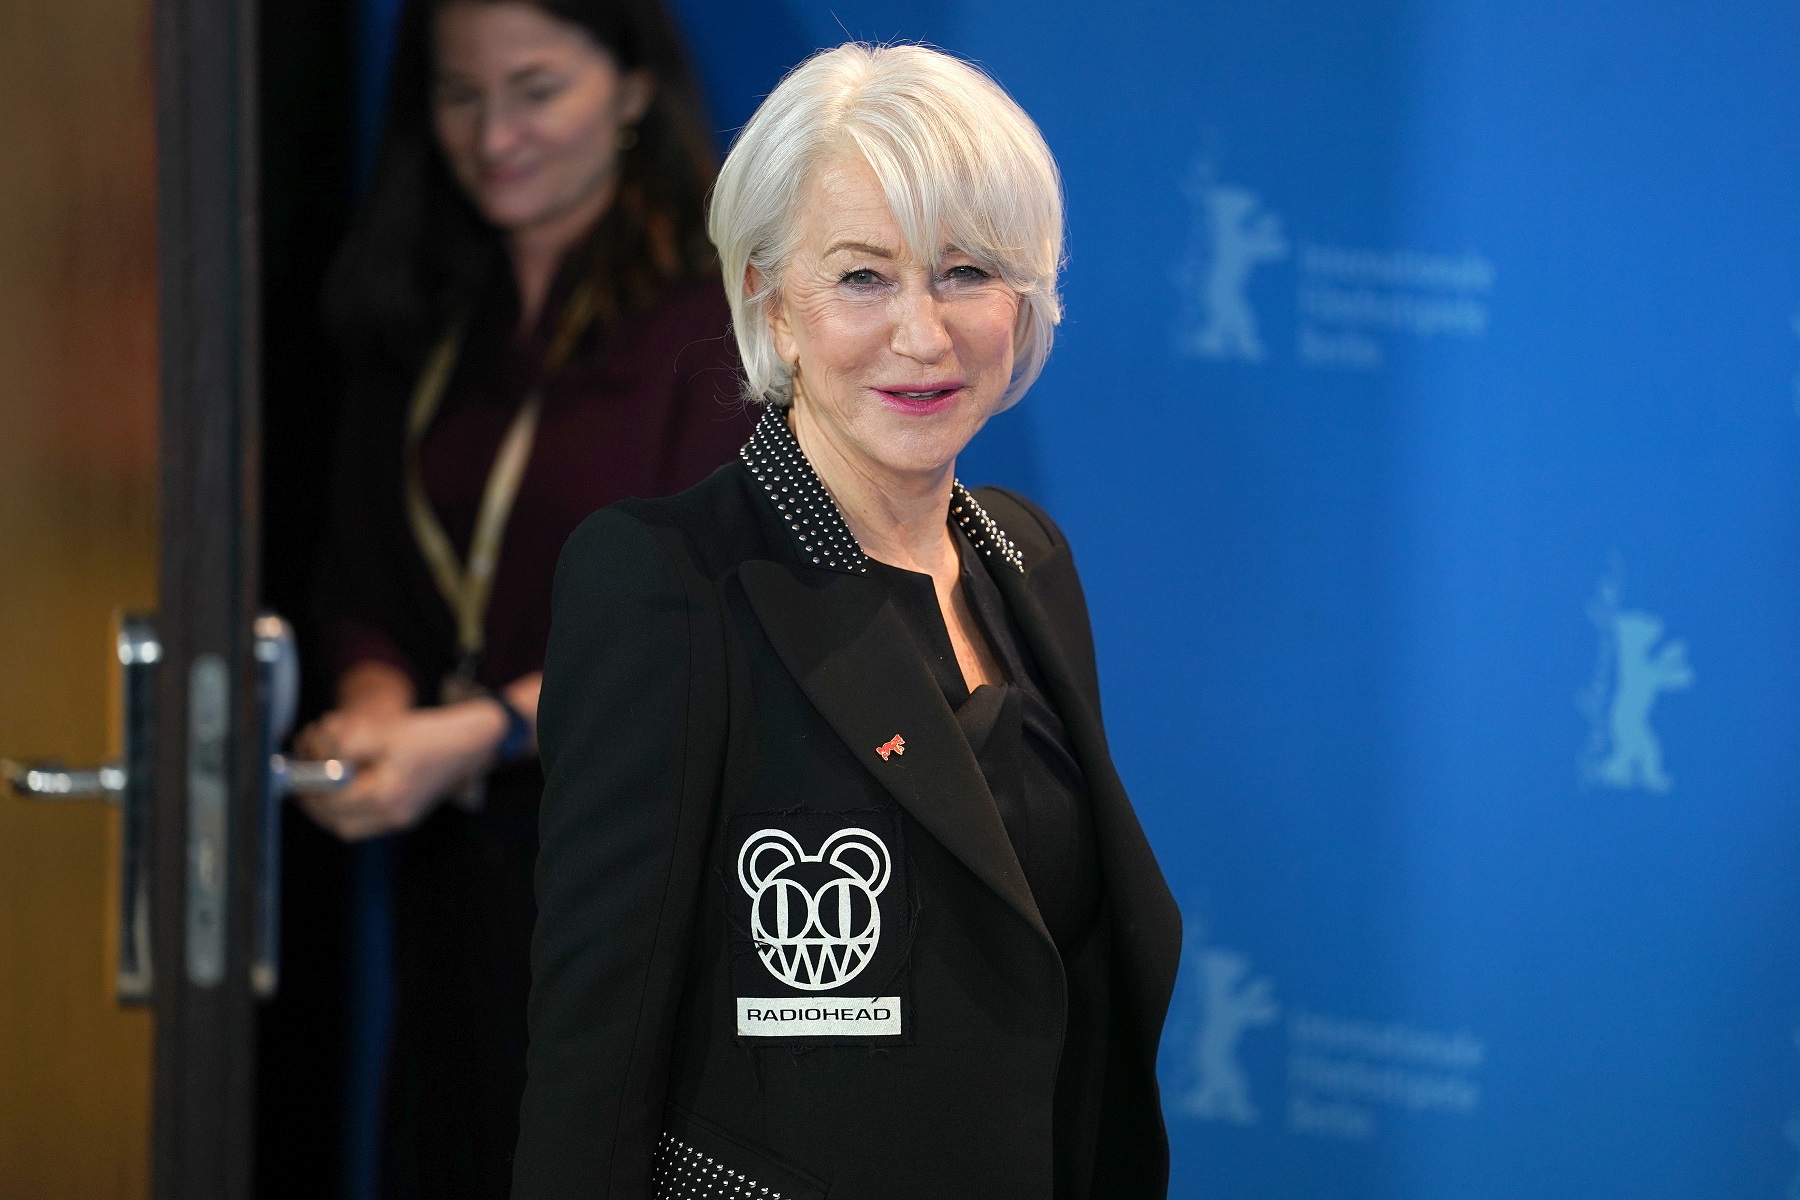 BERLIN, GERMANY - FEBRUARY 27: Helen Mirren wearing a 'Radiohead' patch on her jacket is seen at the 